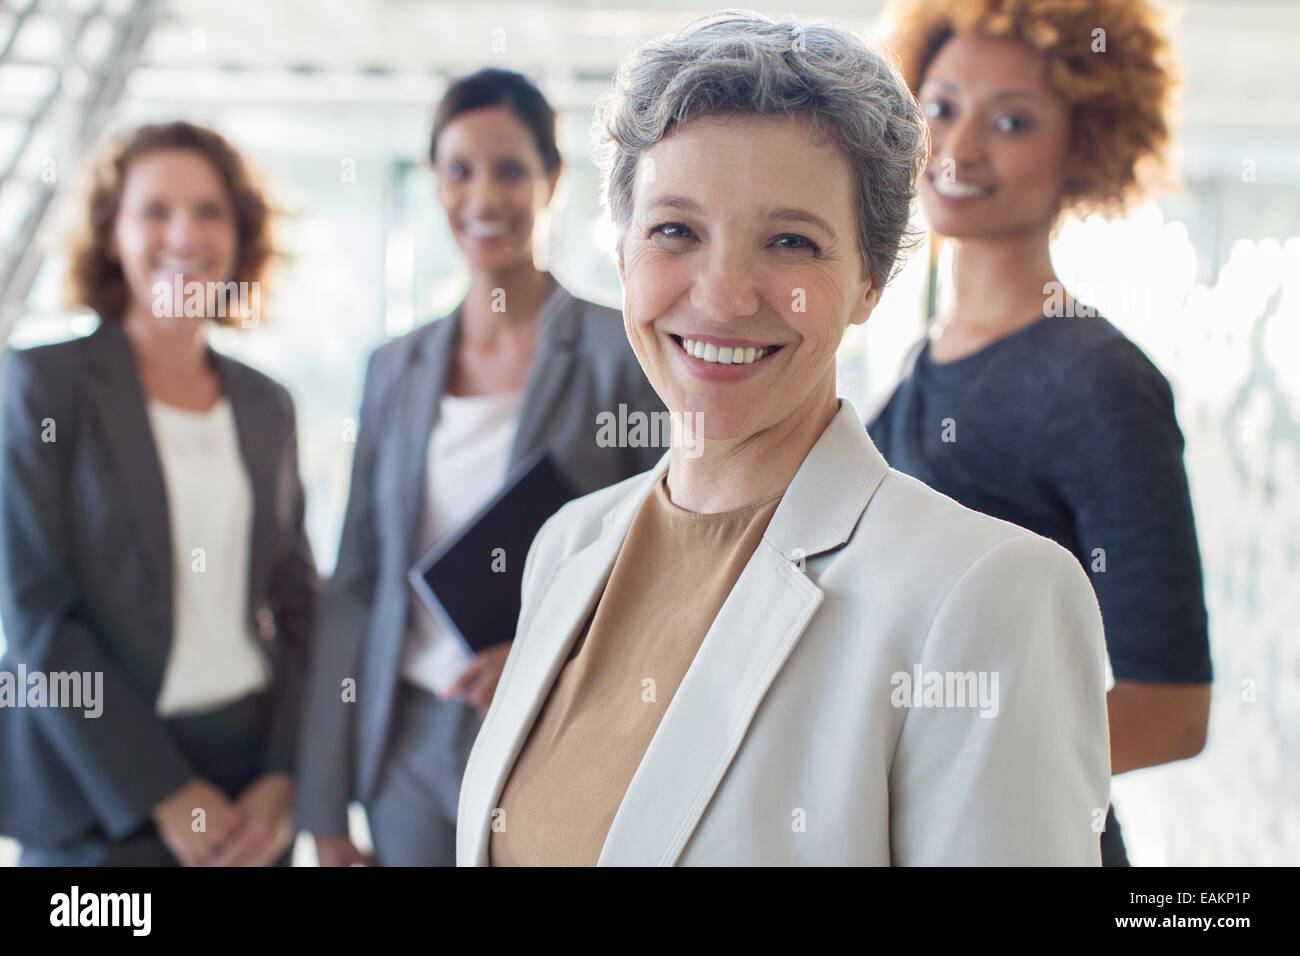 Portrait of smiling mature businesswoman with office team in background Stock Photo